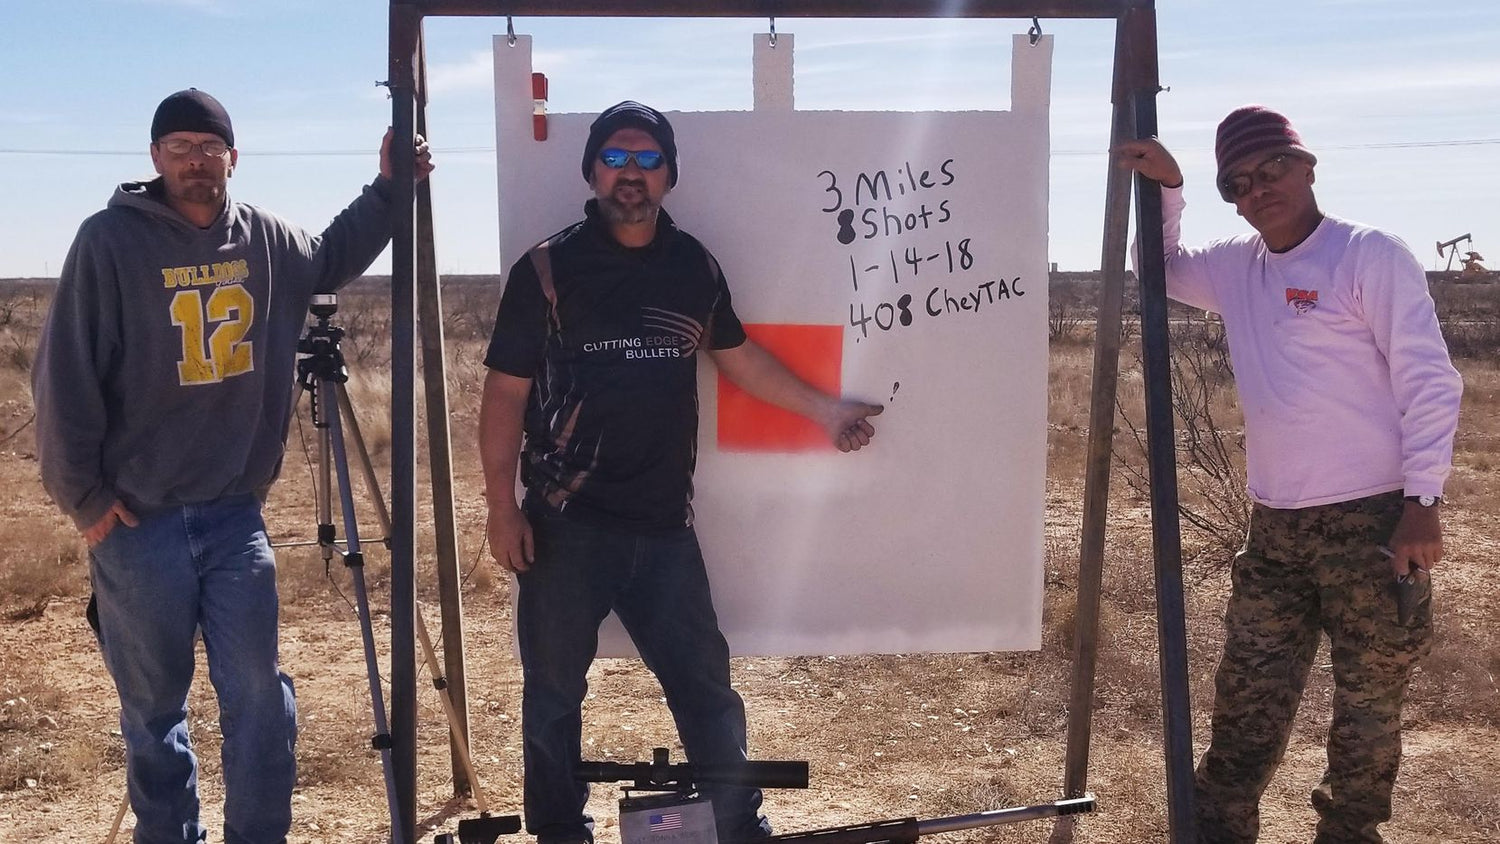 West Texas marksman reportedly breaks distance record with 3-mile shot